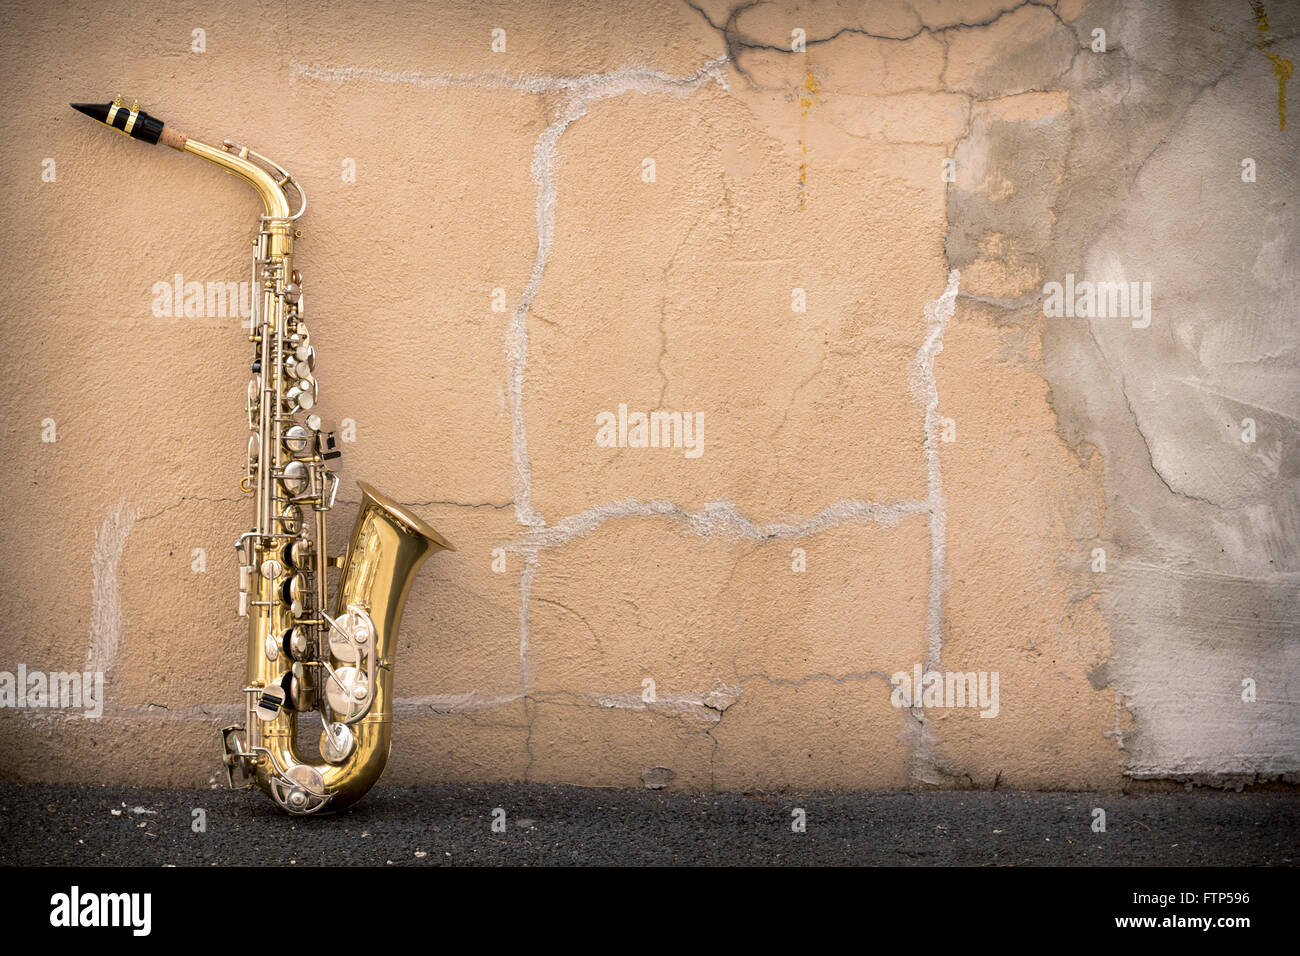 Jazz musical instrument saxophone with grungy street background Stock Photo